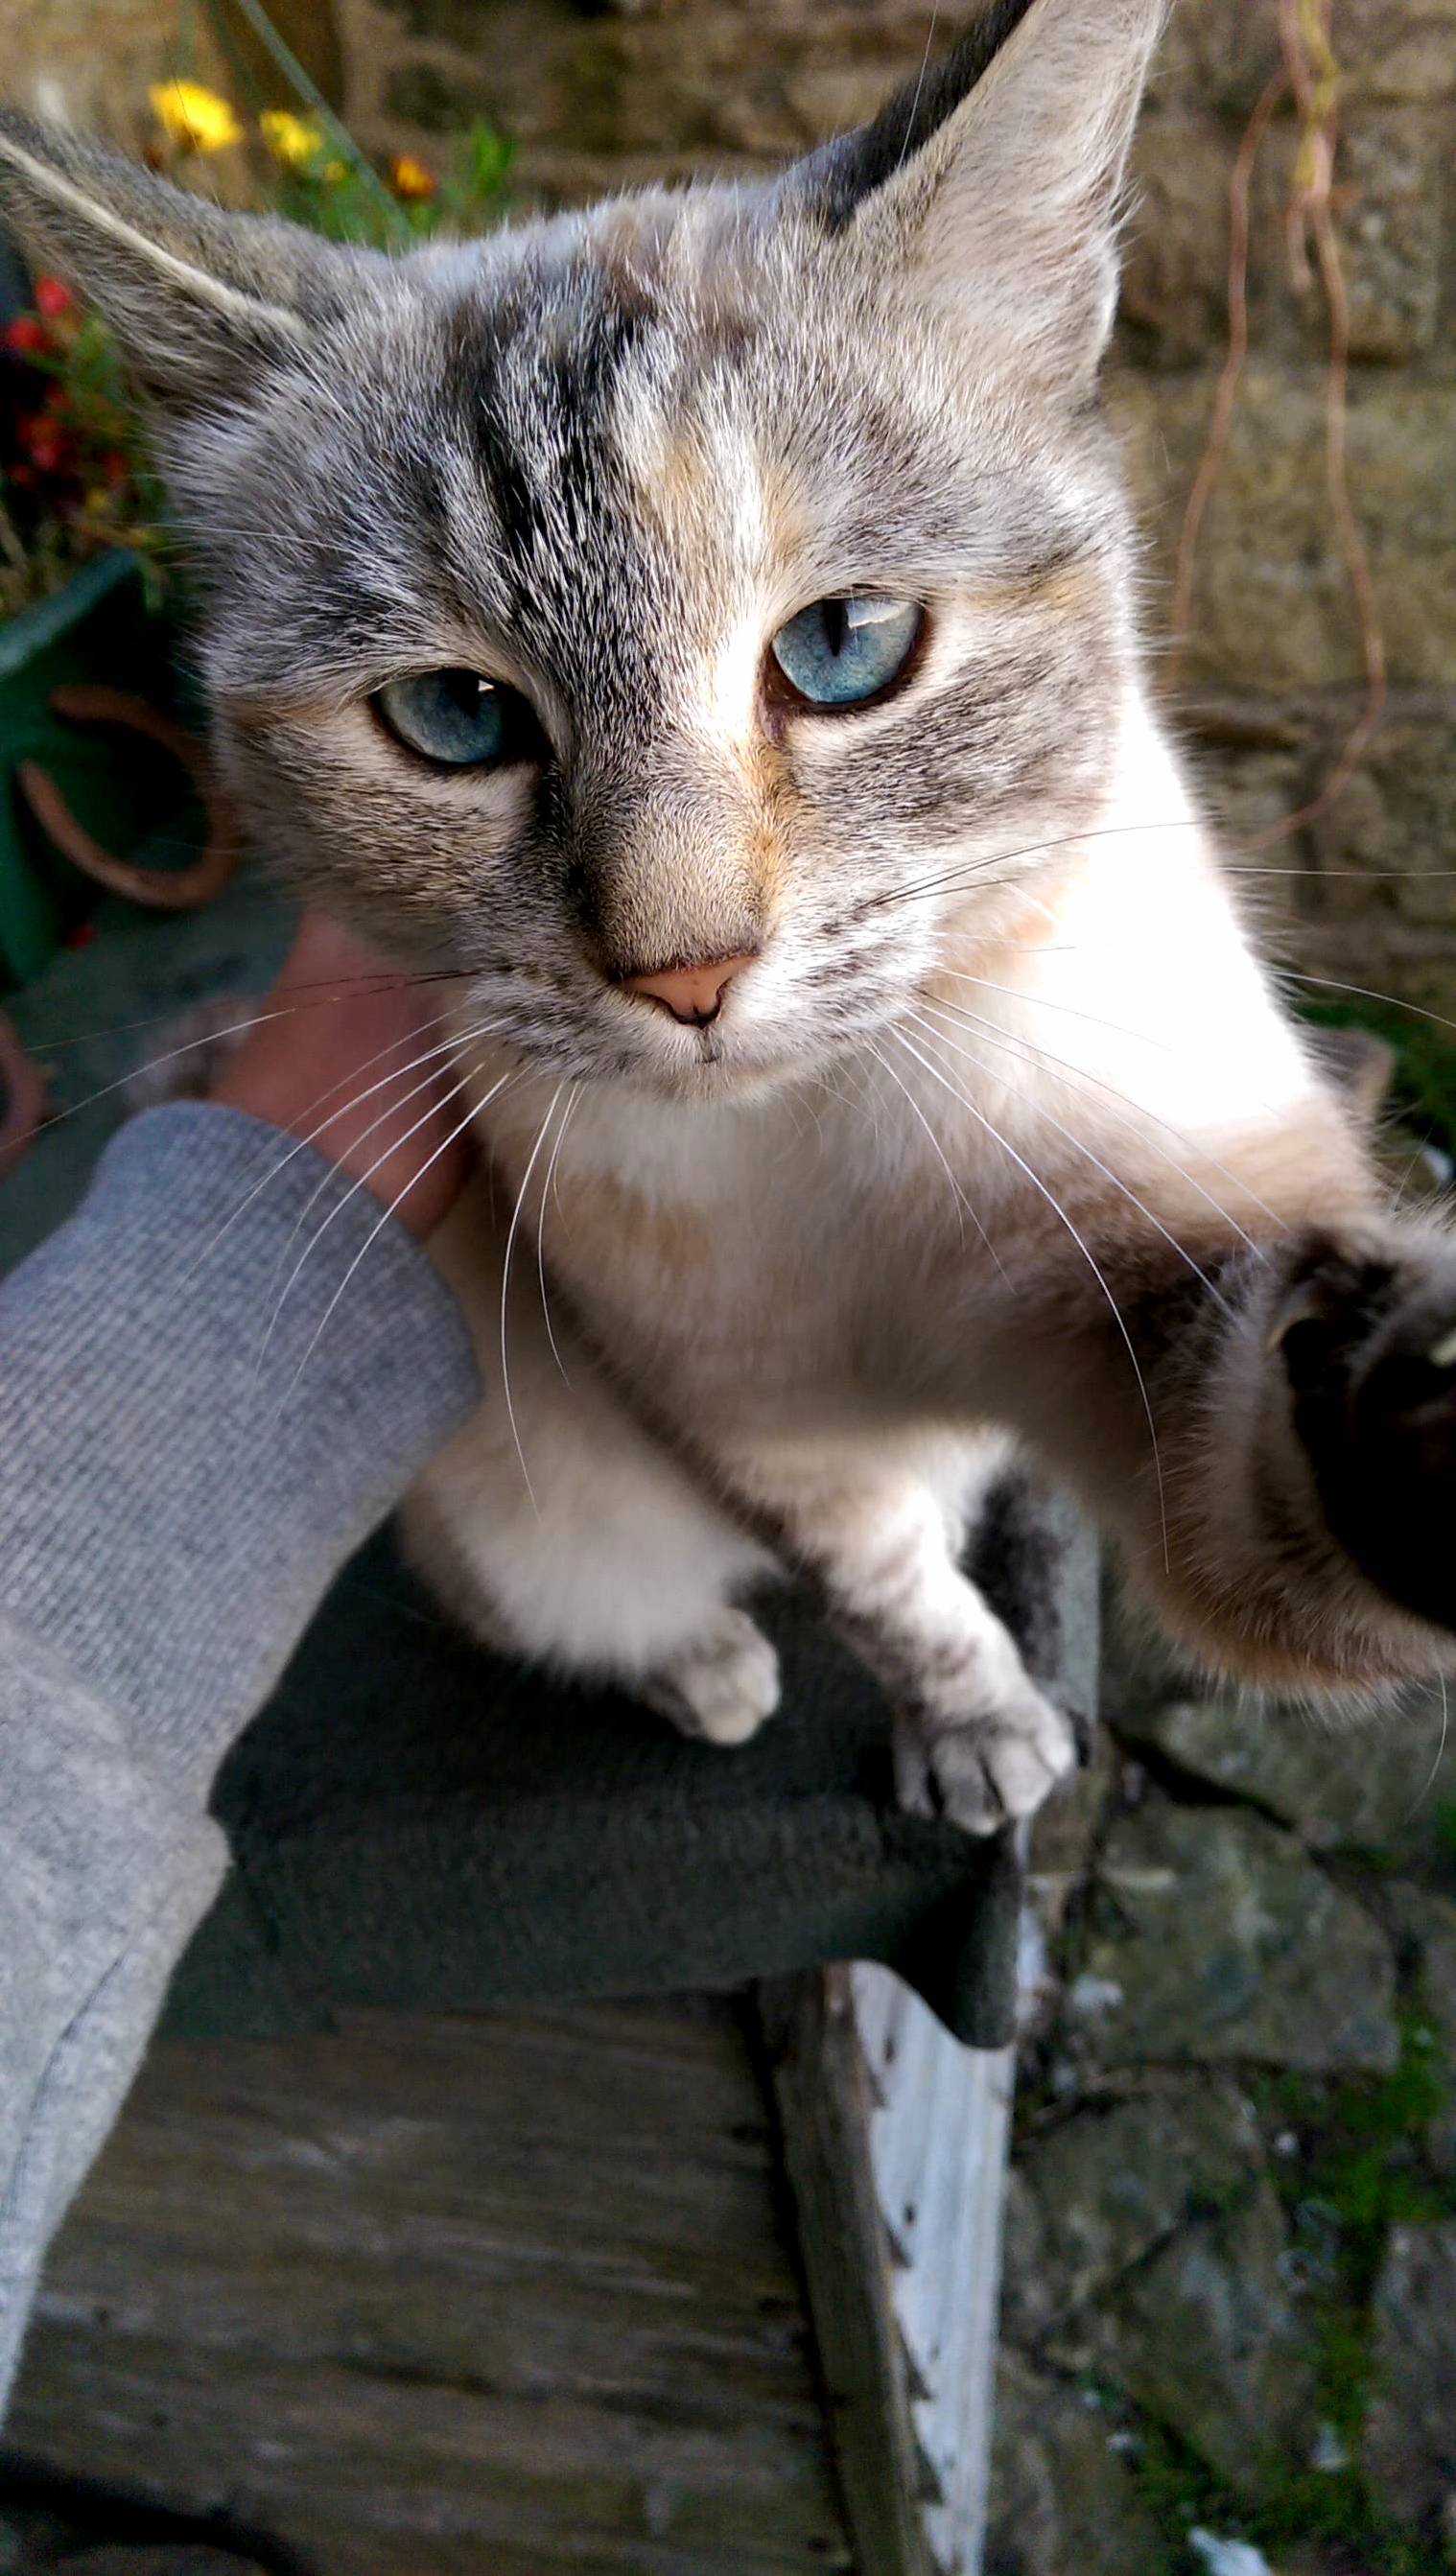 Found this puurrtty cat on a farm